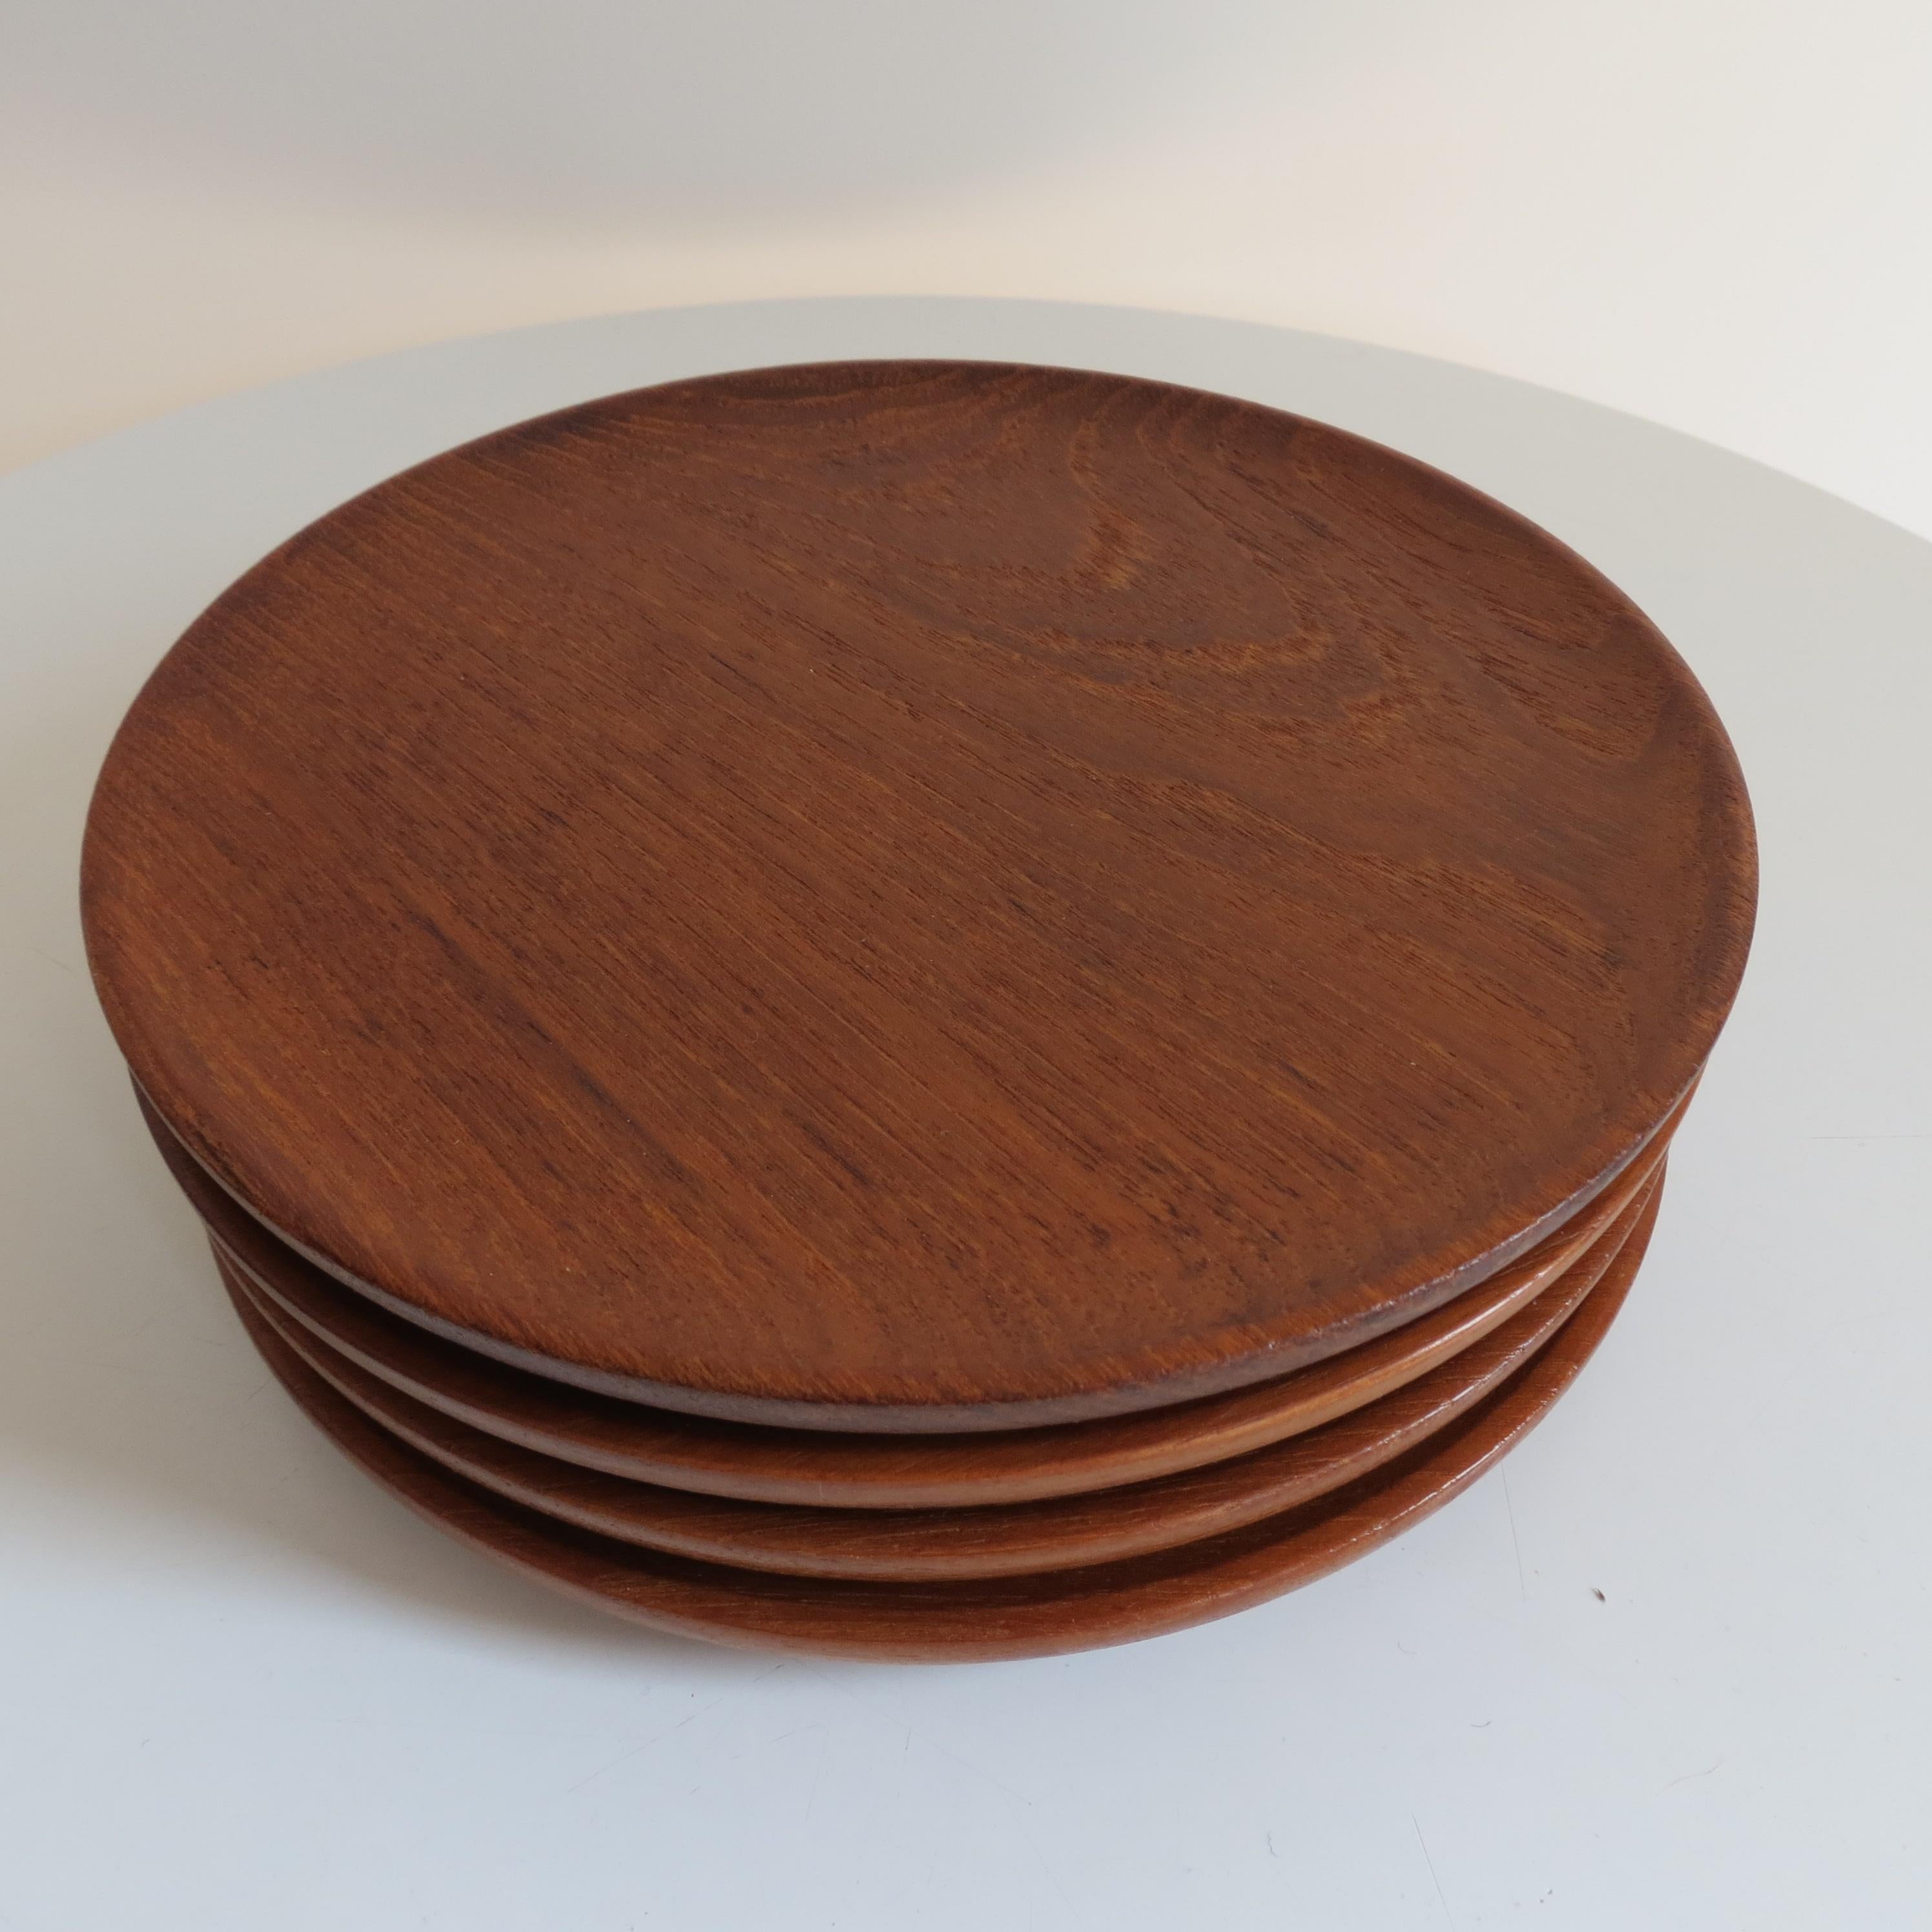 4 hand produced teak plates by Galatix England from the 1960s
Solid Burma teak.

Good vintage condition with minimal signs of wear. 
Each plate is stamped to the underside 
ST1208.